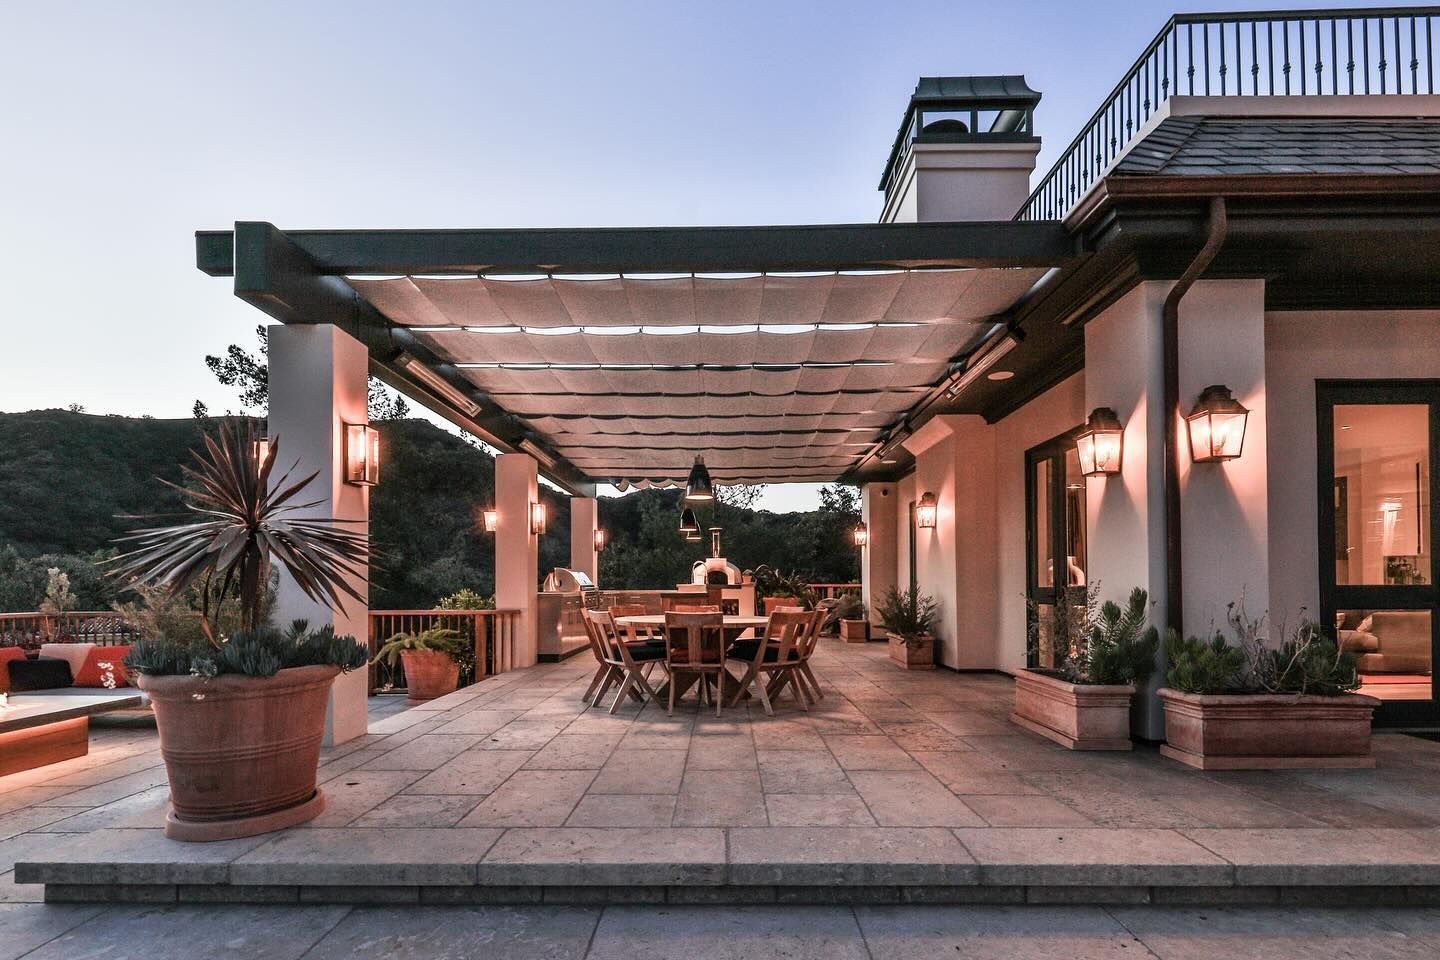 Expansive stone terrace covered by a pergola with the glow of the home's interior lighting emanating through windows.